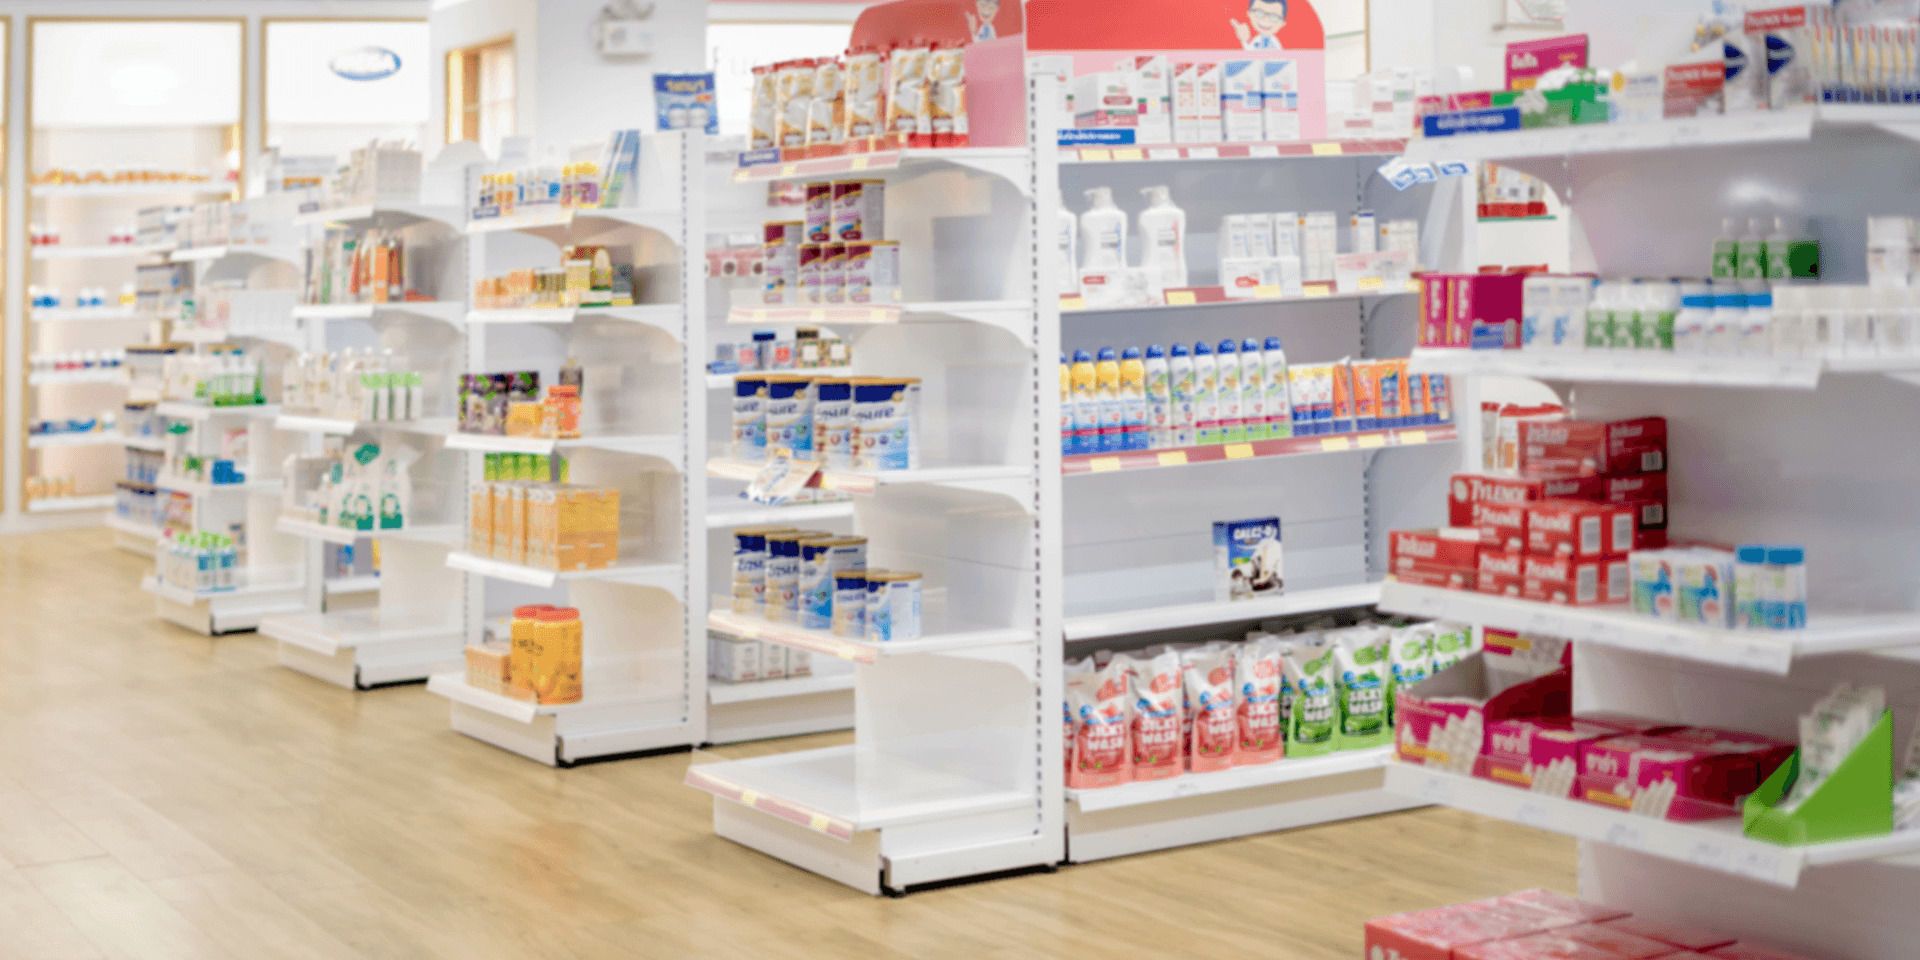 Aisles of over-the-counter products inside a pharmacy